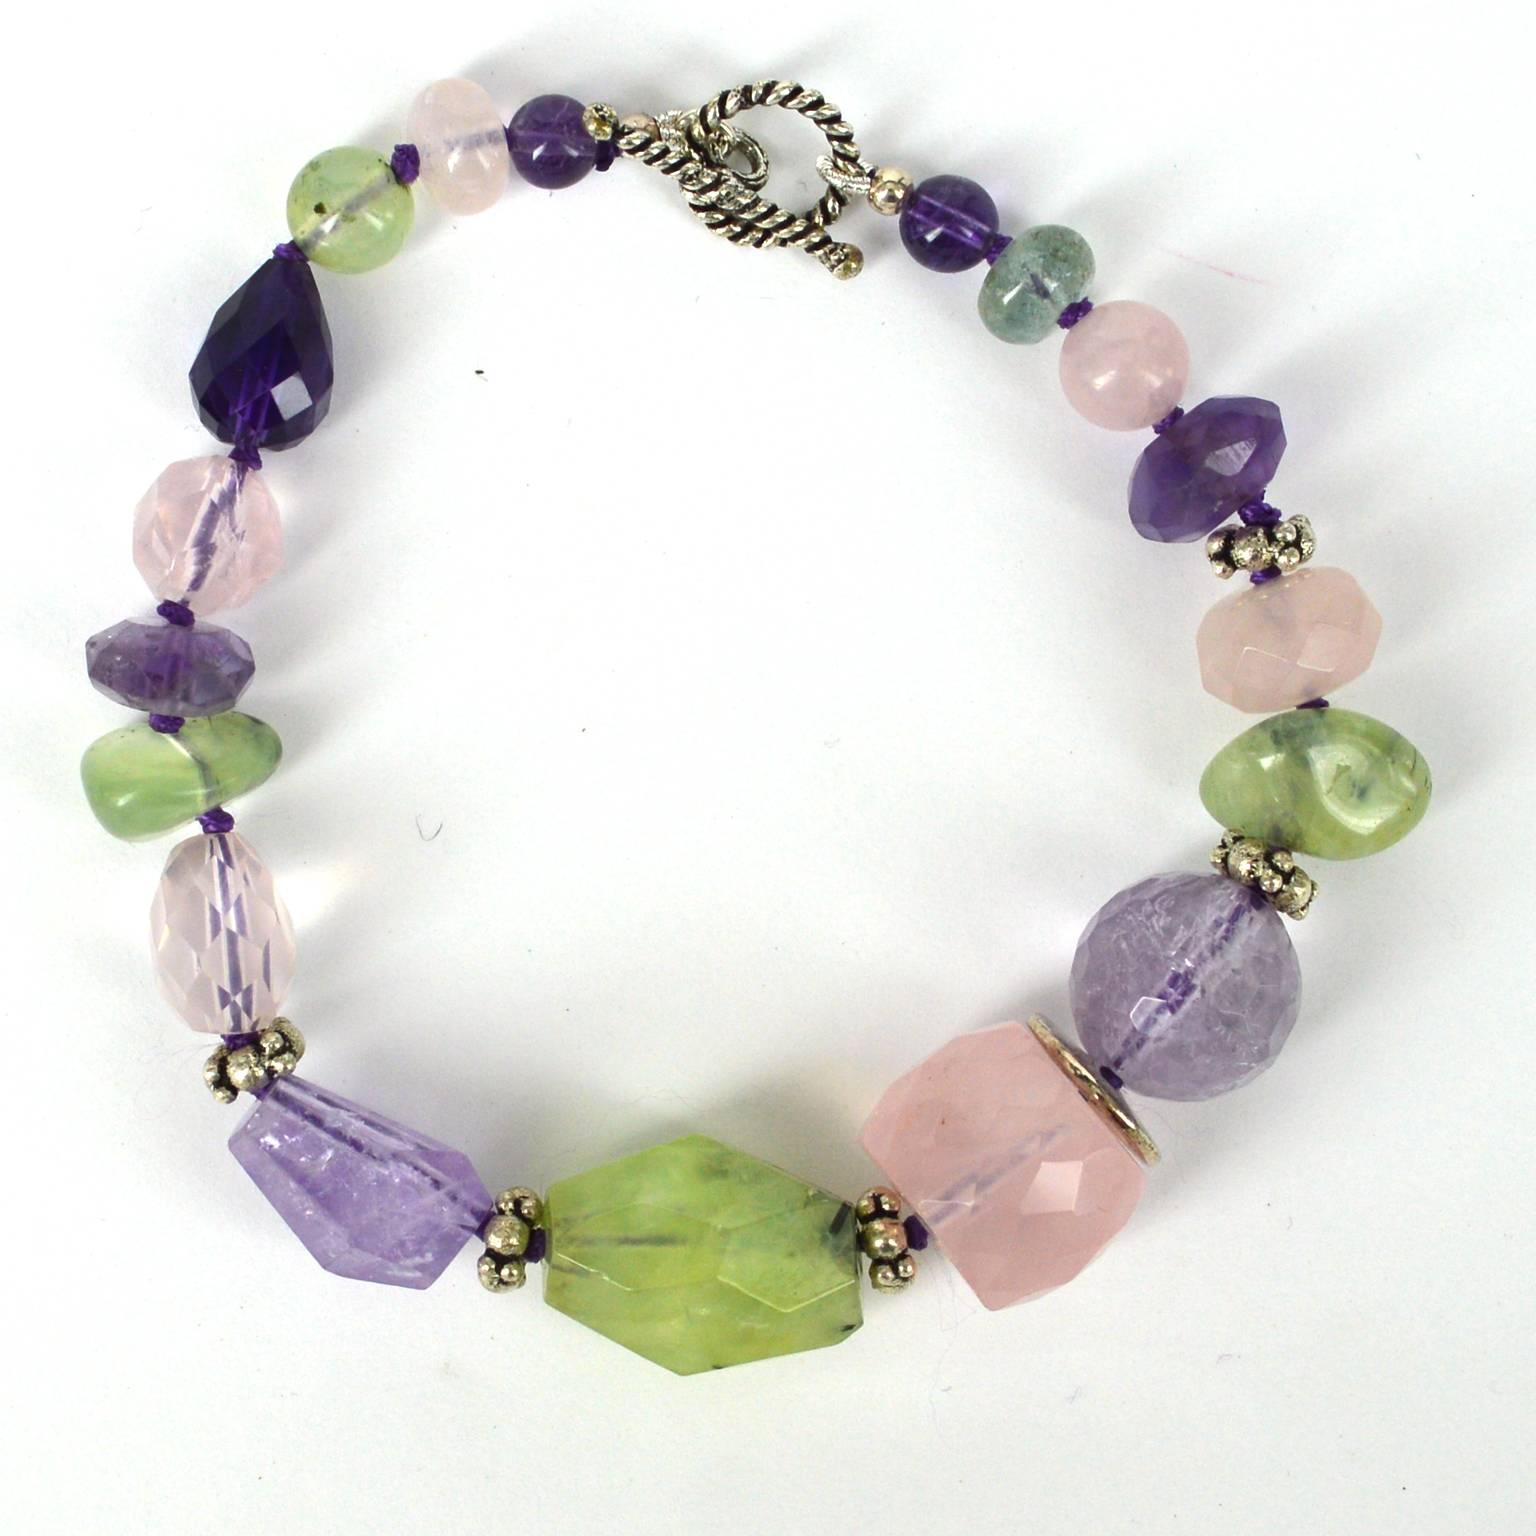 prehnite and amethyst together